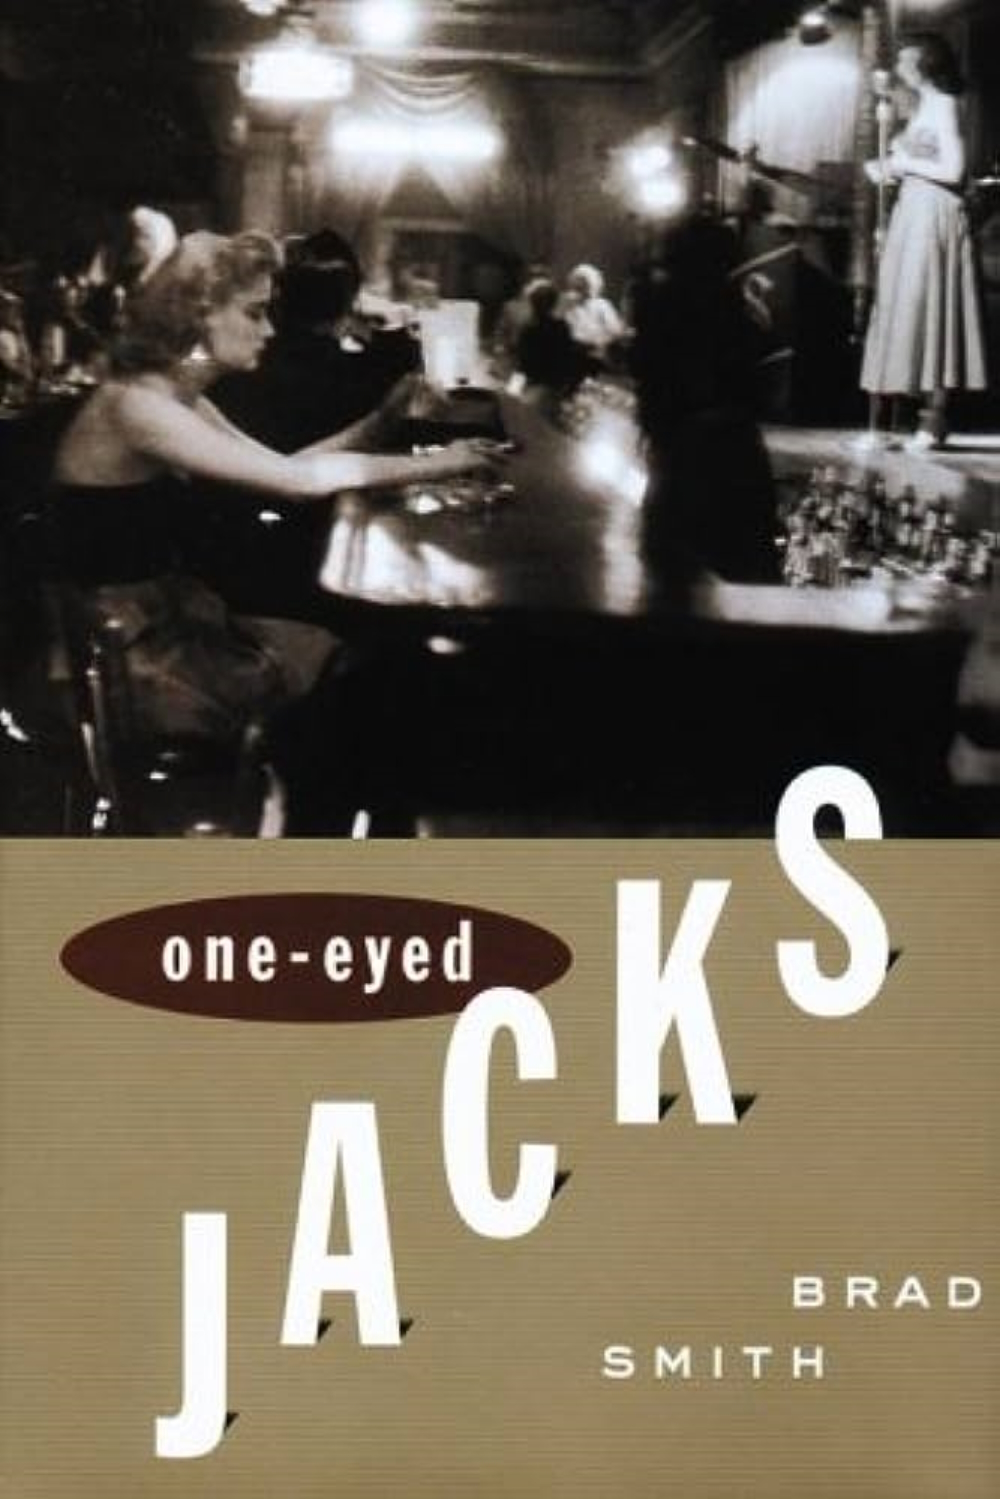 ONE-EYED JACKS was shortlisted for the renowned Dashiell Hammett Award in 2000.